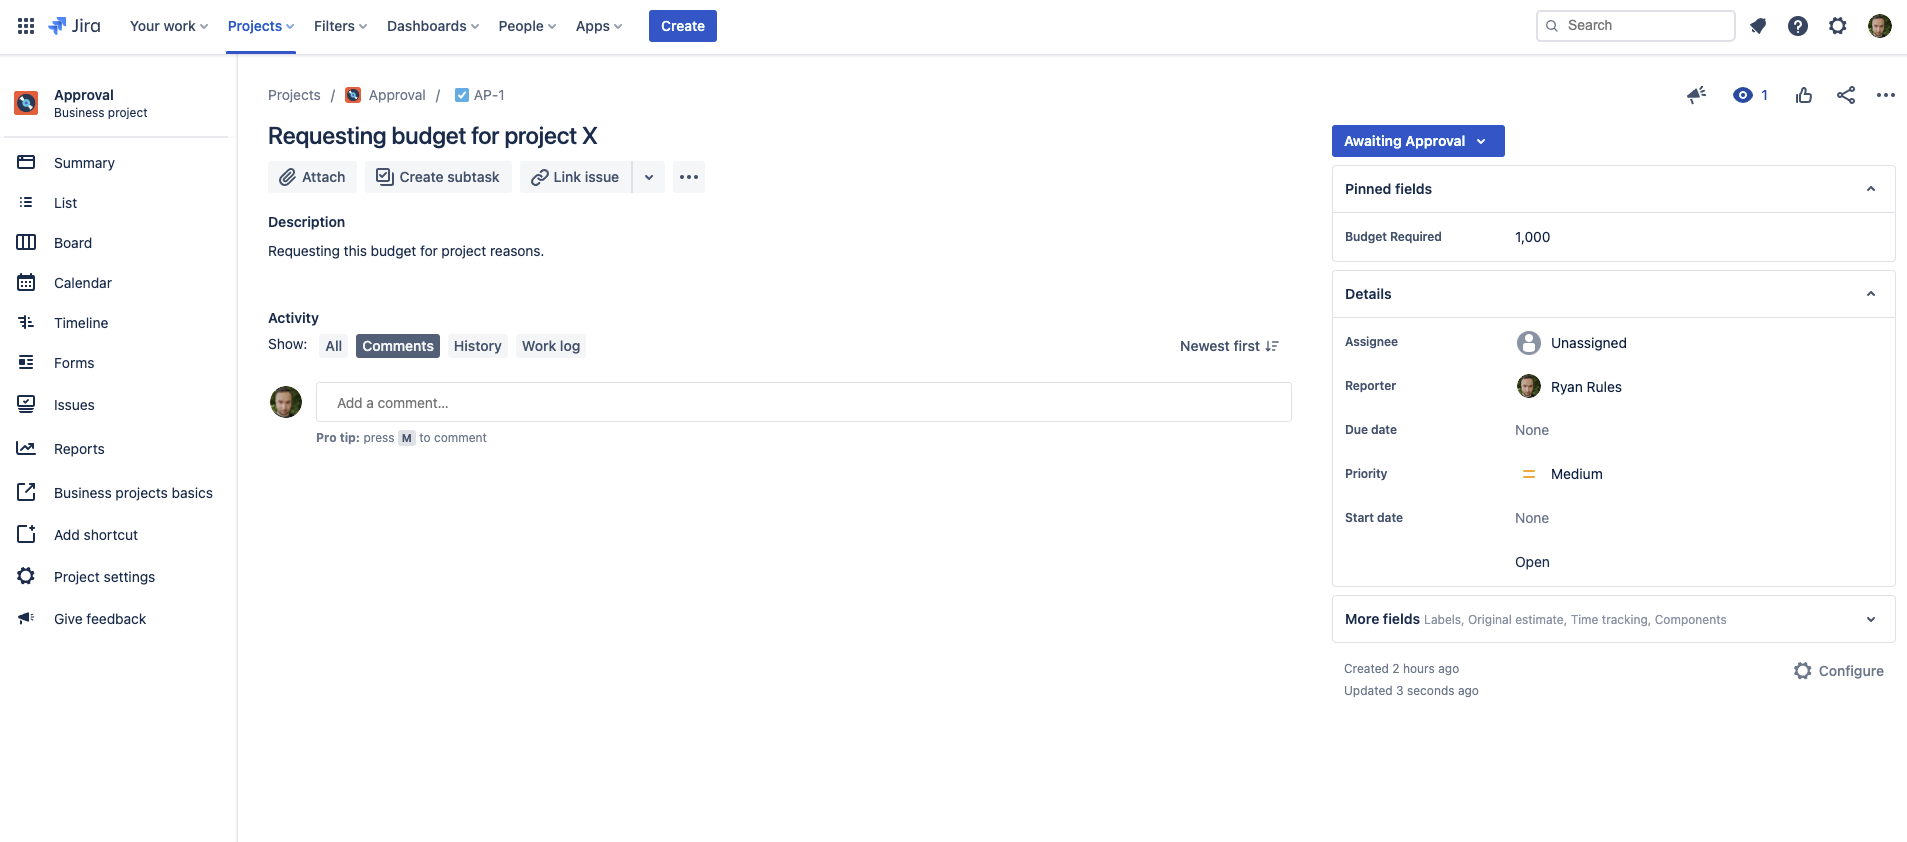 Example Jira issue automatically transitioned to Awaiting Approval status